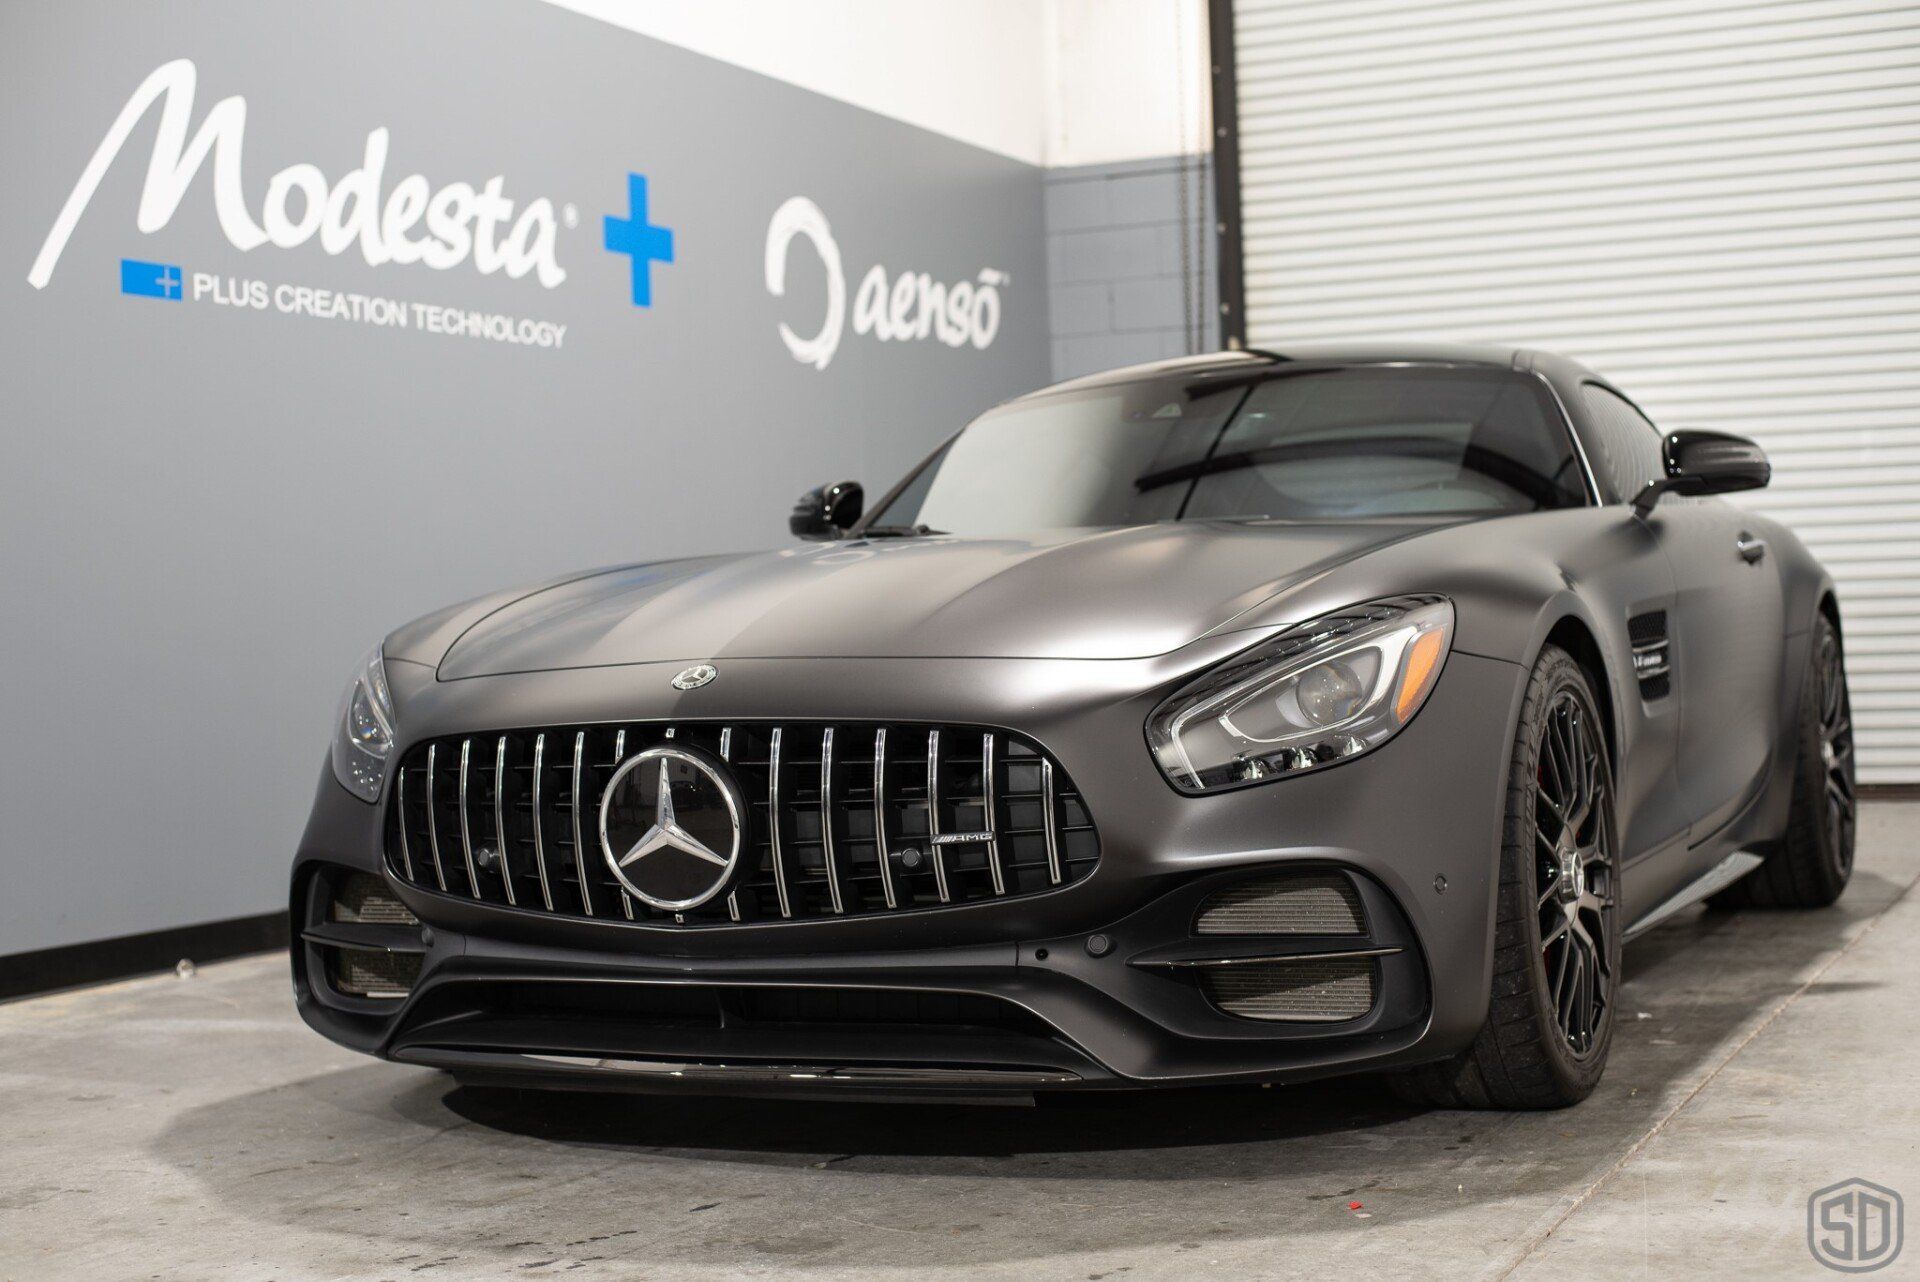 Matte to Satin Finish on an AMG GT Coupe